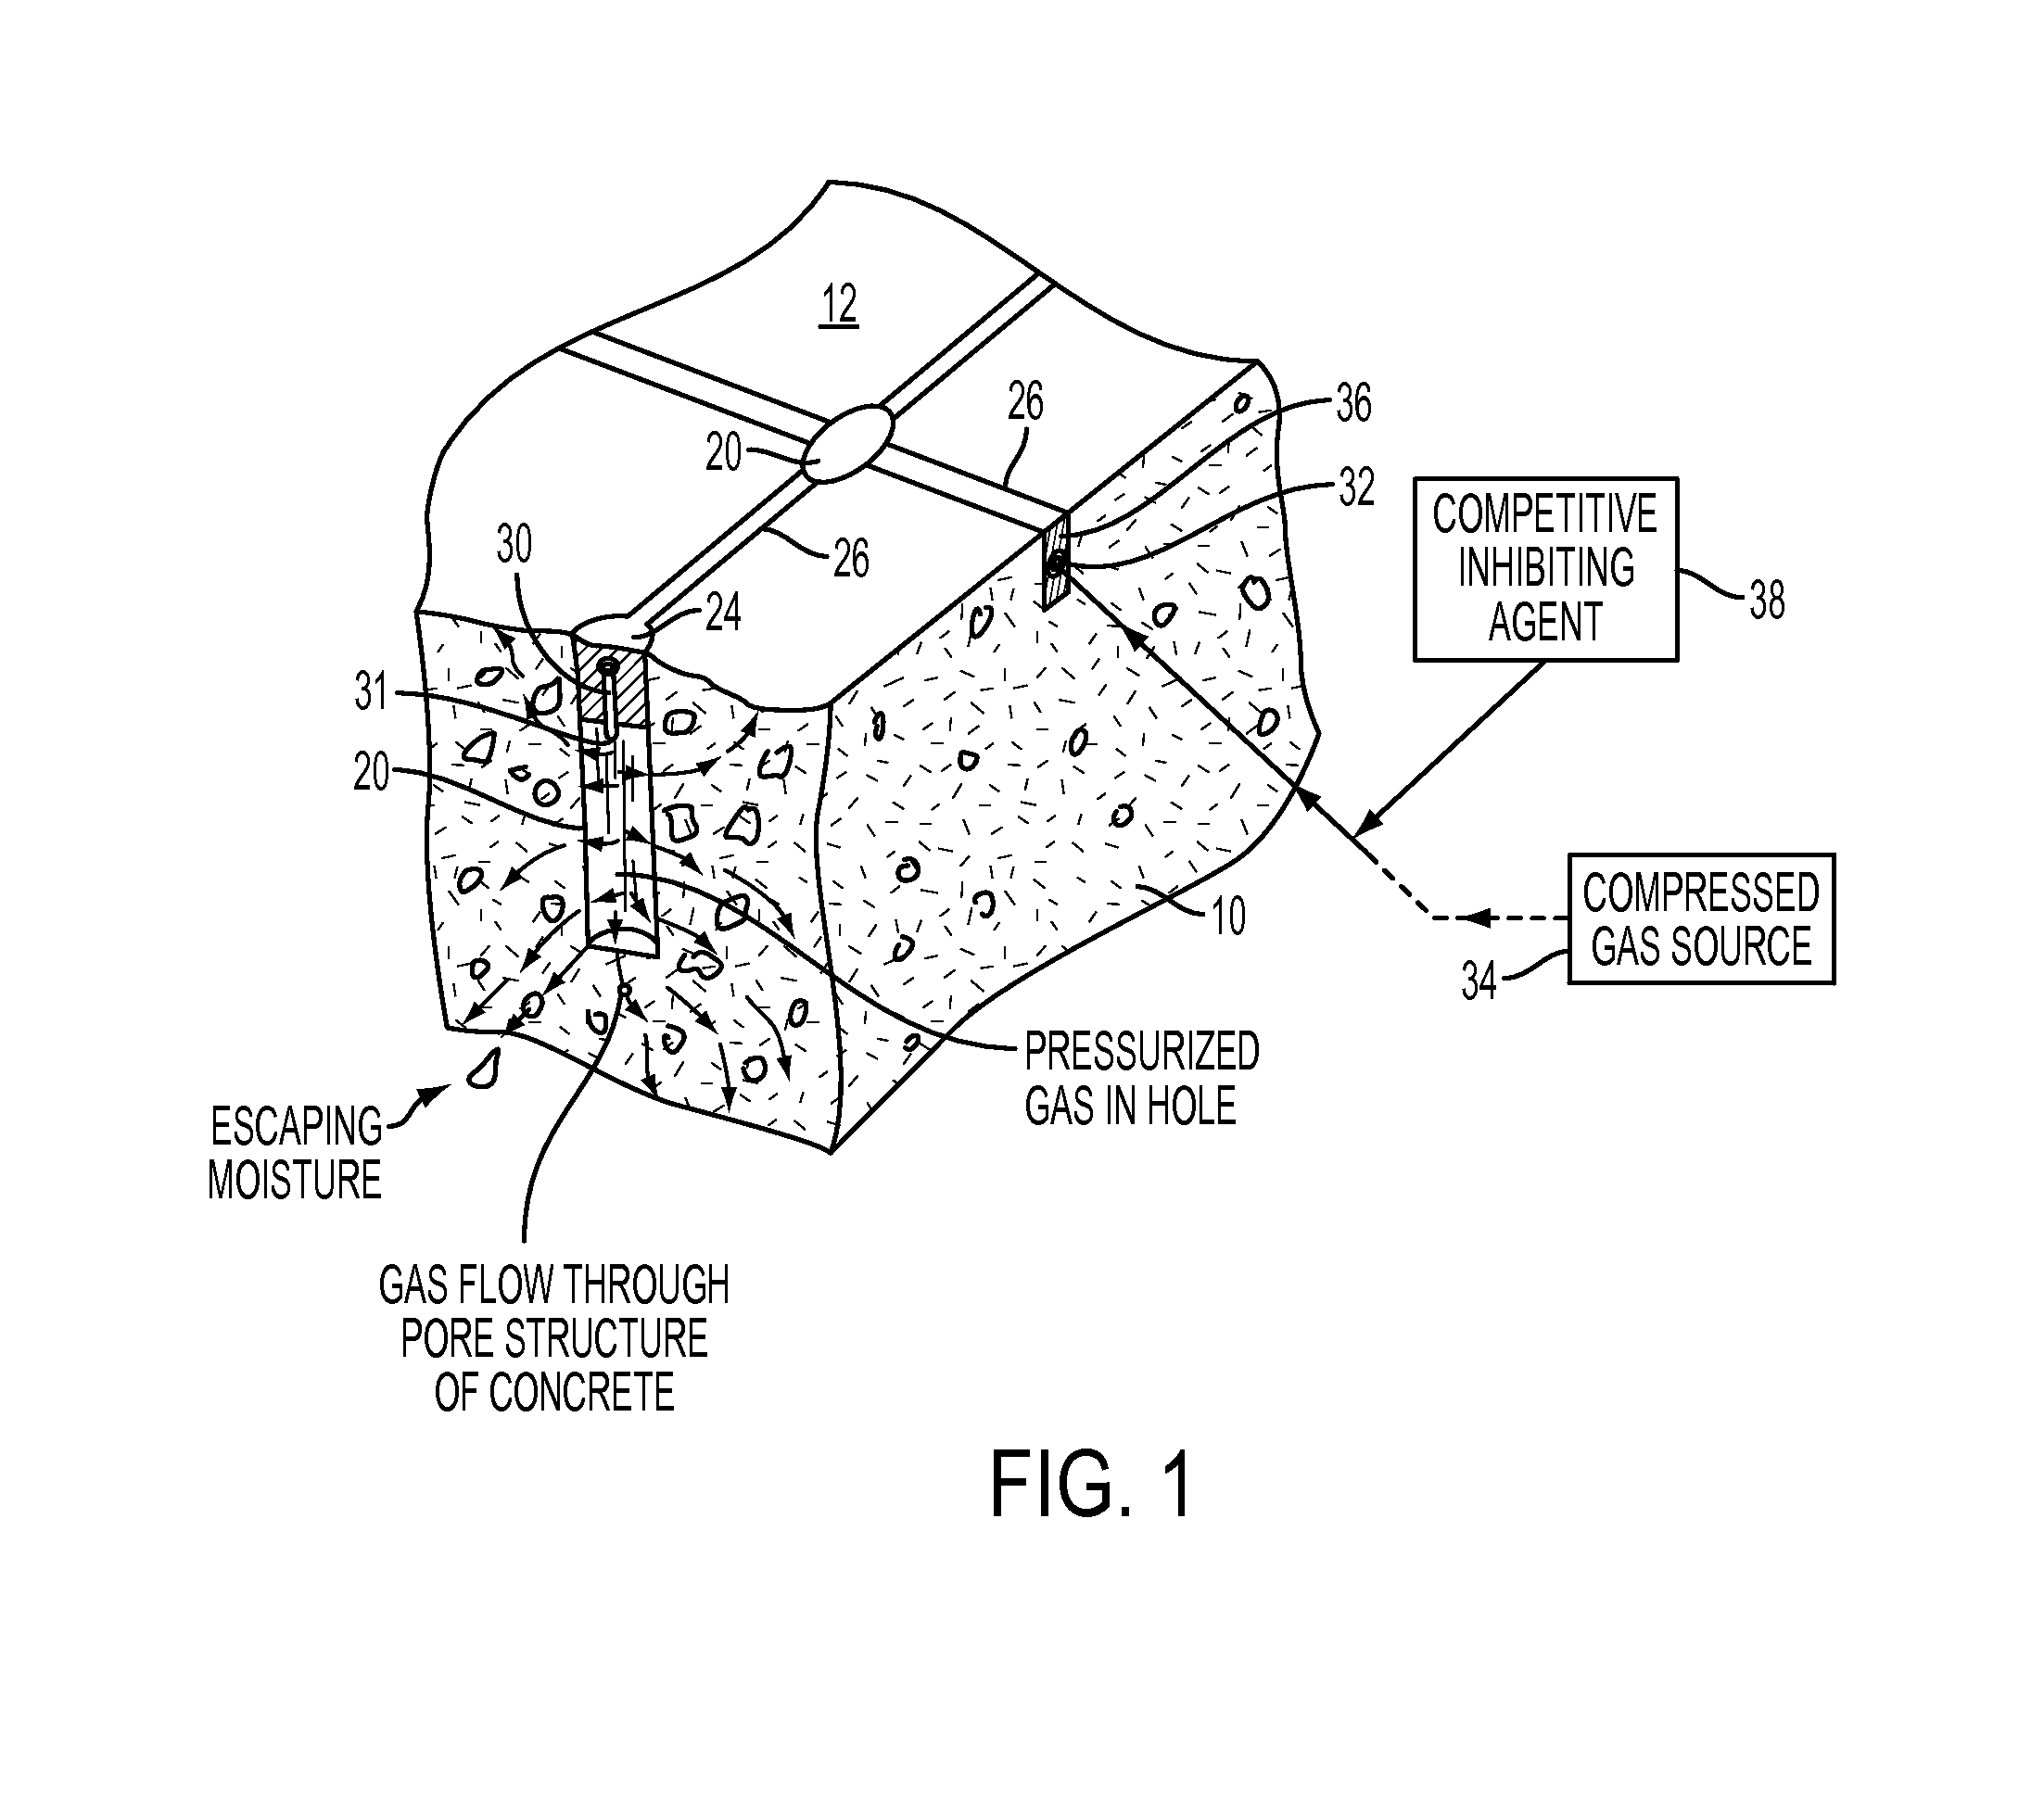 System and method for internal pressurized gas drying of concrete